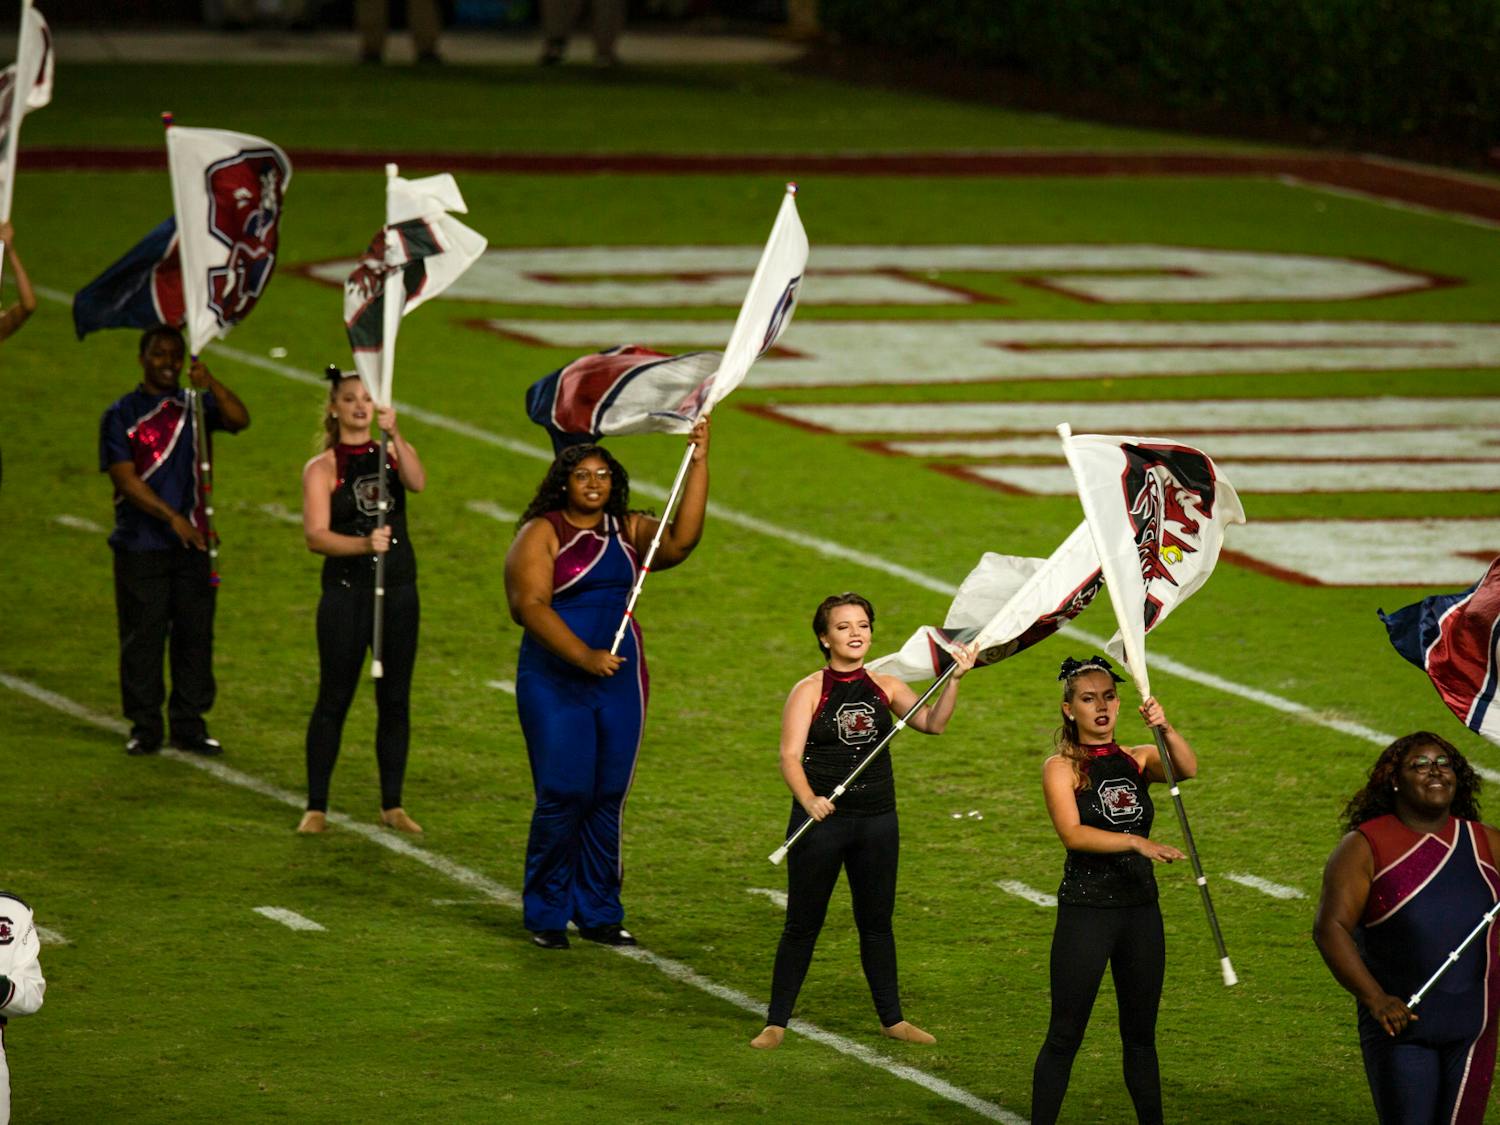 The University of South Carolina and South Carolina State marching bands and flag teams join together for a rendition of &nbsp;“Ain't no Mountain High Enough" during the halftime show on Sept. 29, 2022. The Gamecocks defeated the S.C. Bulldogs 50-10.